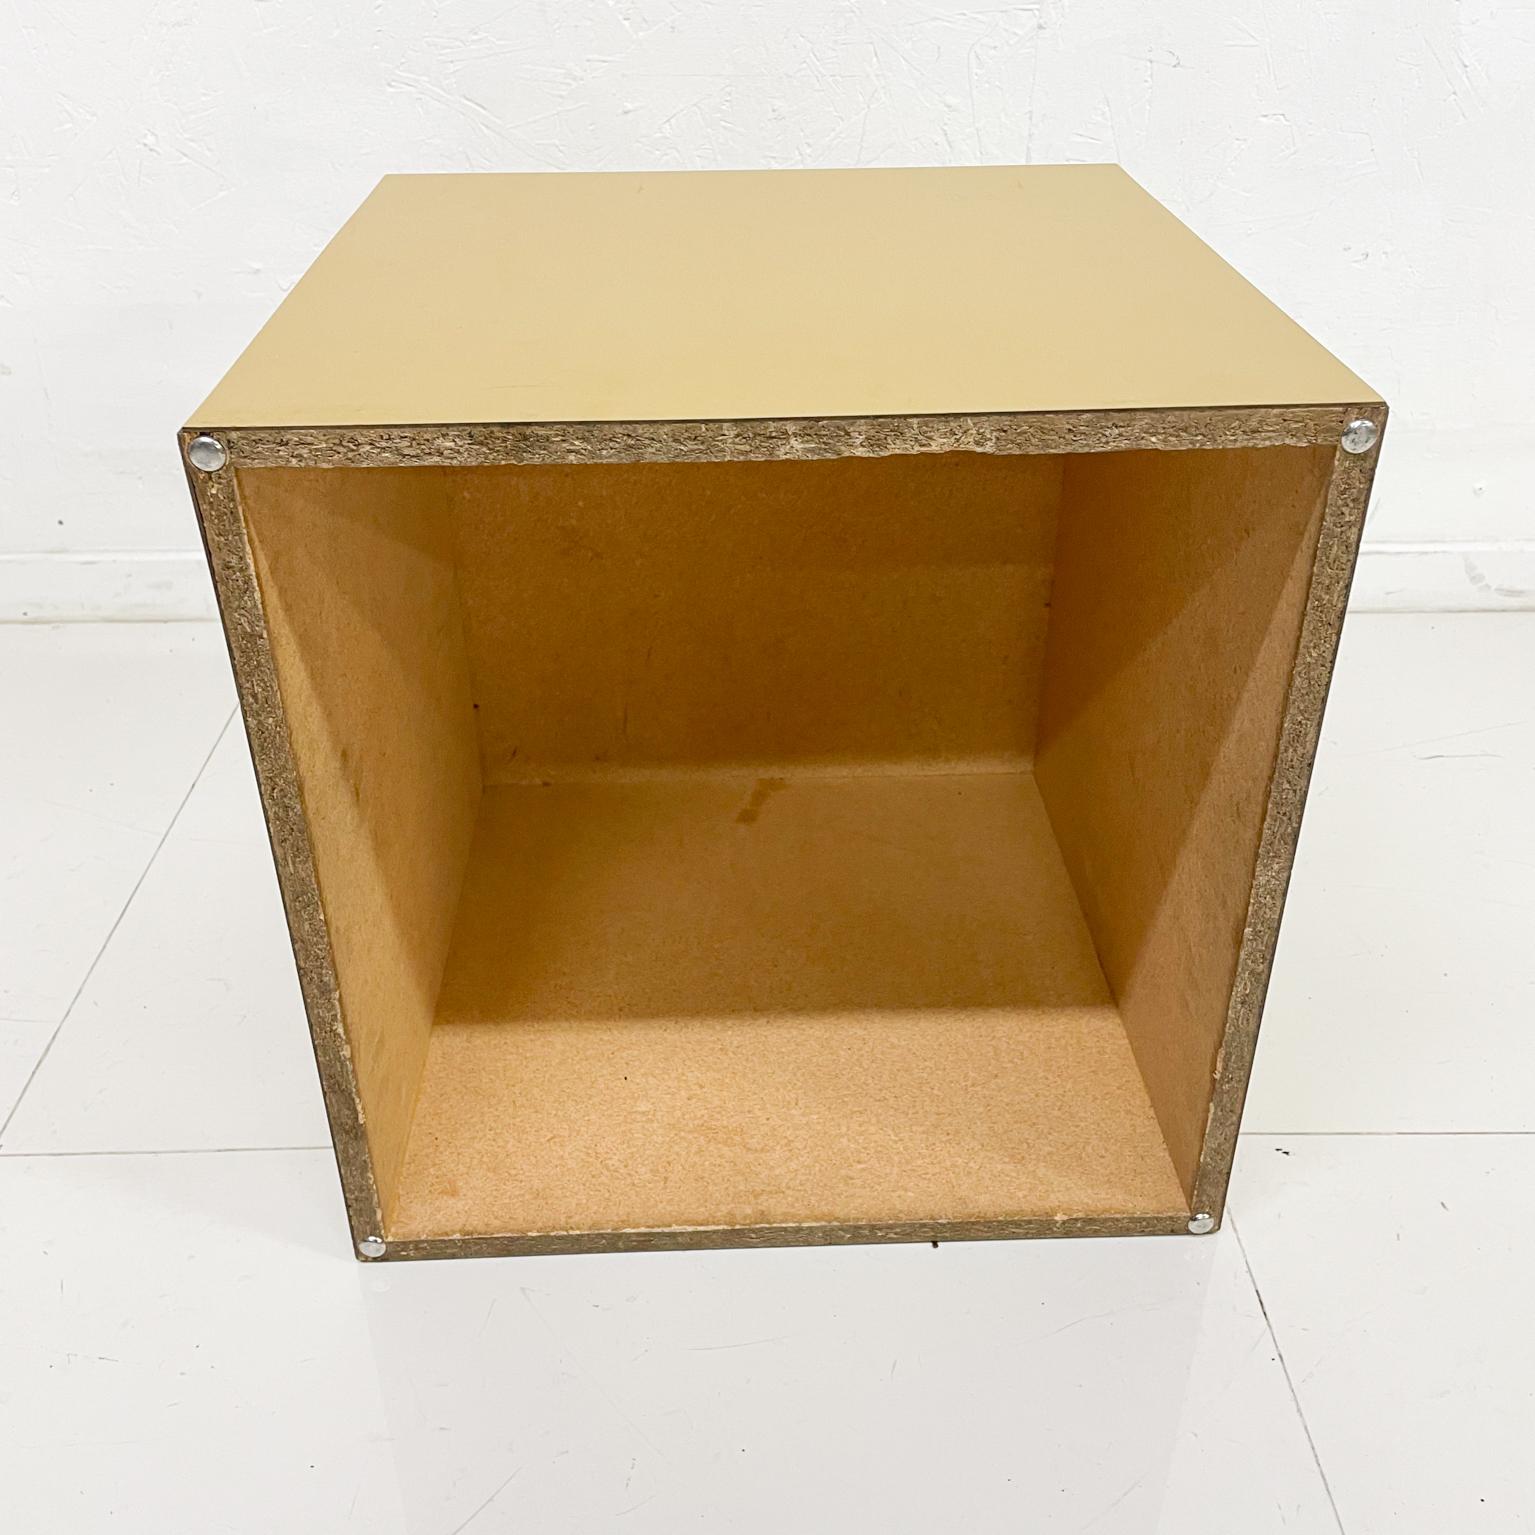 Modern Formica Cube Side End Table in Mustard 1970s Vintage USA 1